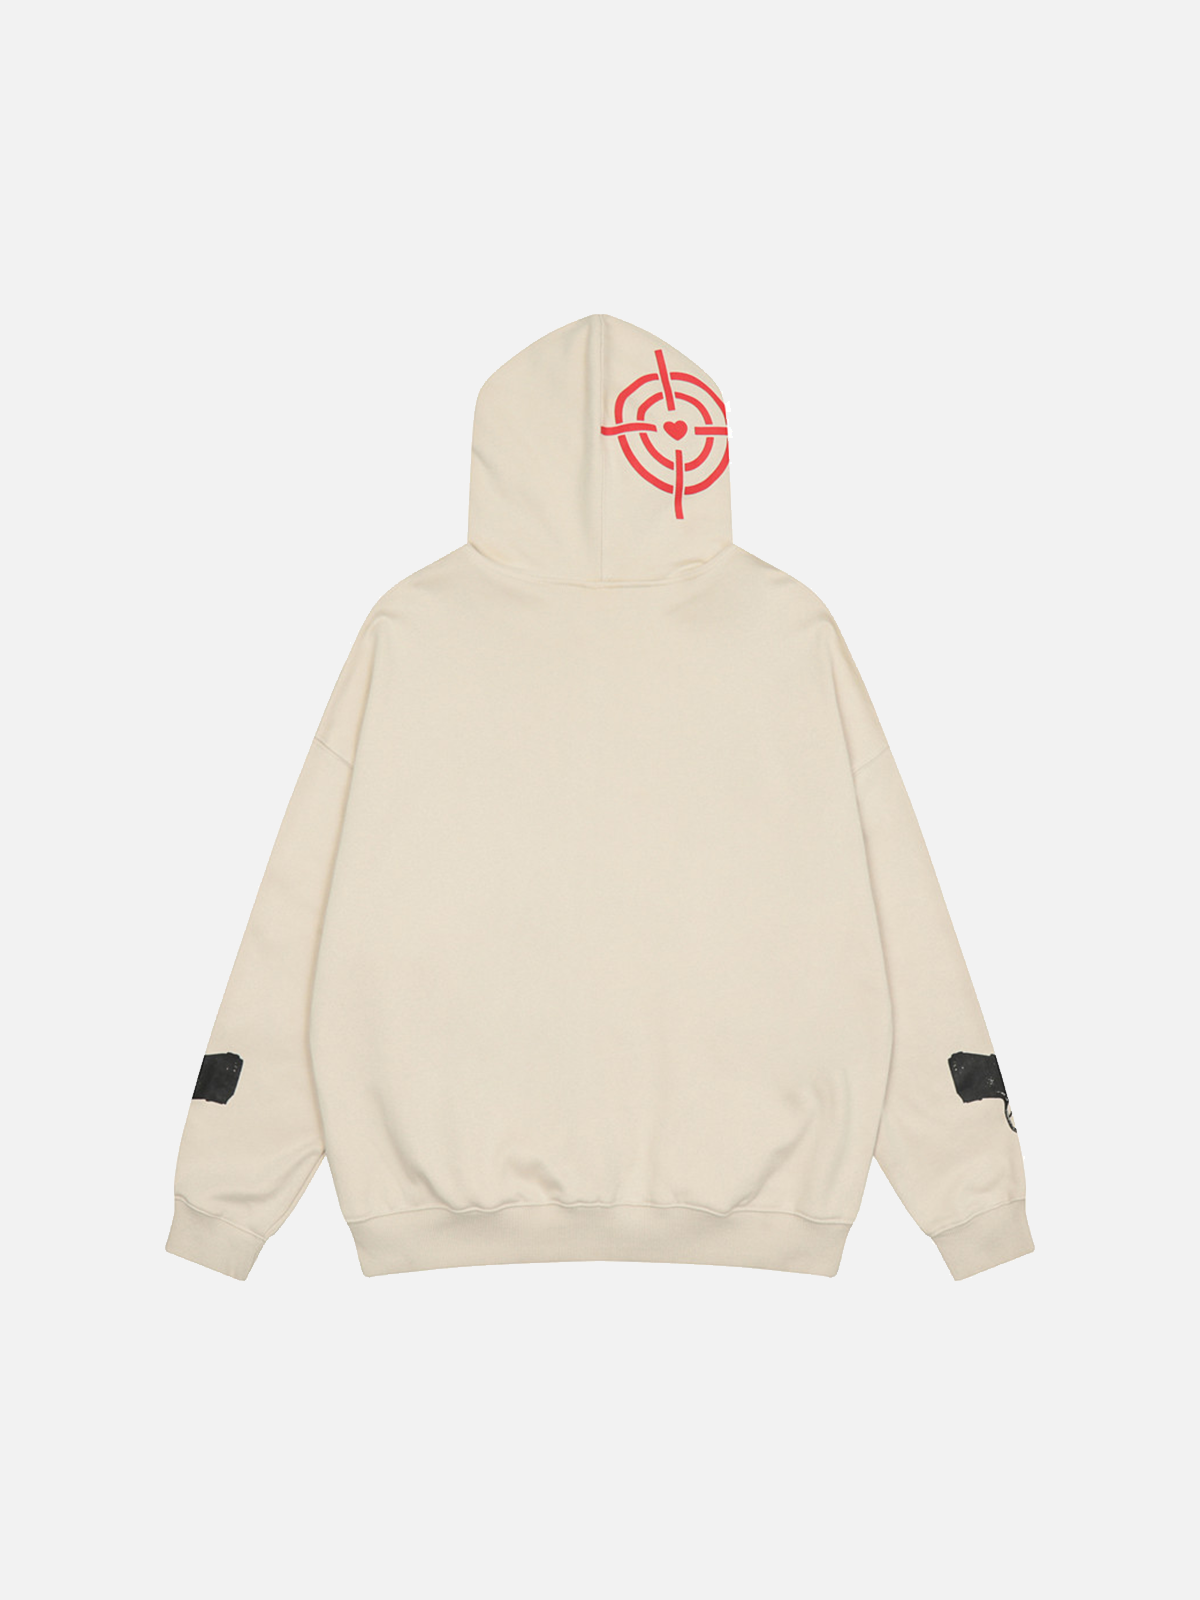 Faire Echo "Aiming At Heart" Print Zip Up Hoodie